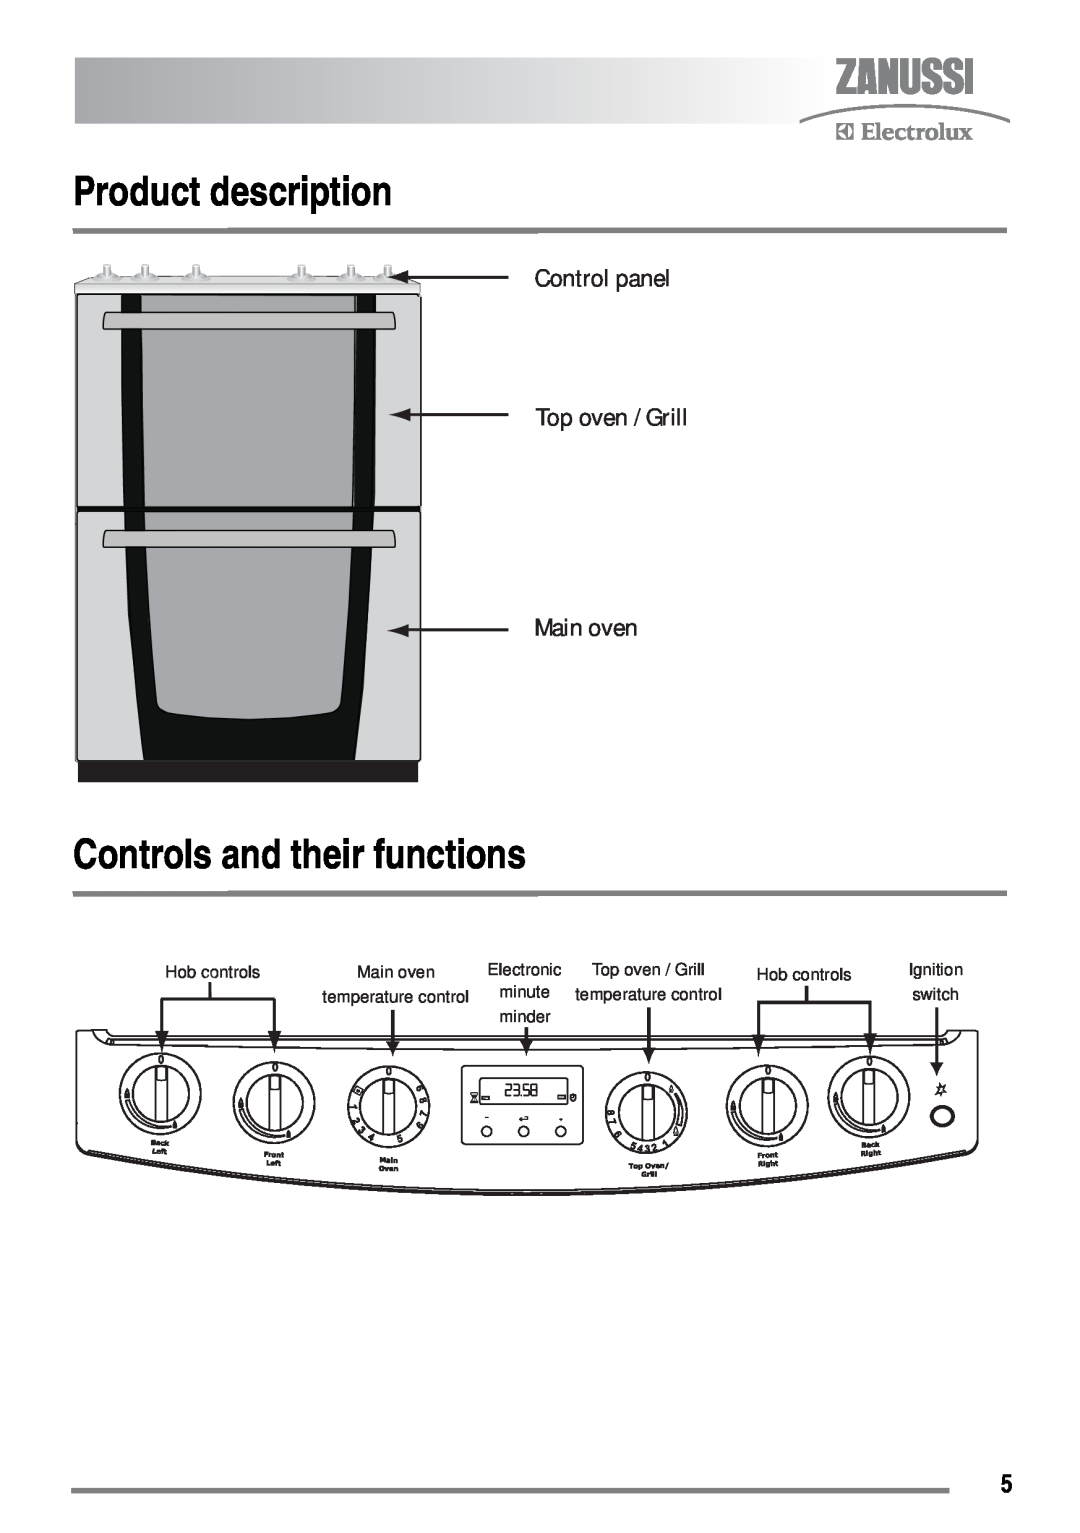 Zanussi ZKG6020 Product description, Controls and their functions, Control panel Top oven / Grill Main oven, minute 